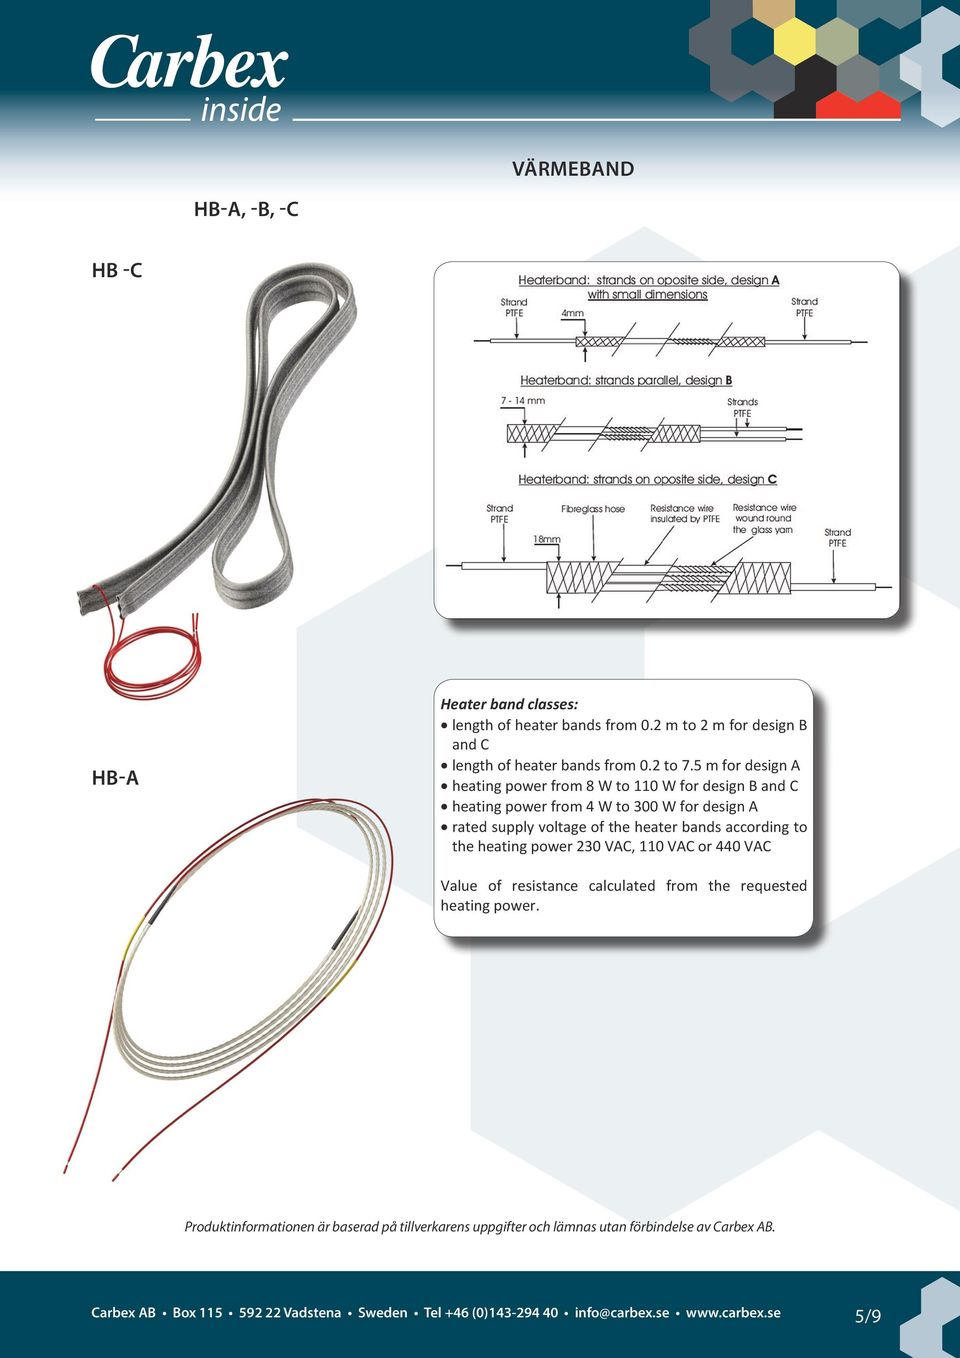 heater bands from 0.2 m to 2 m for design B and C length of heater bands from 0.2 to 7.